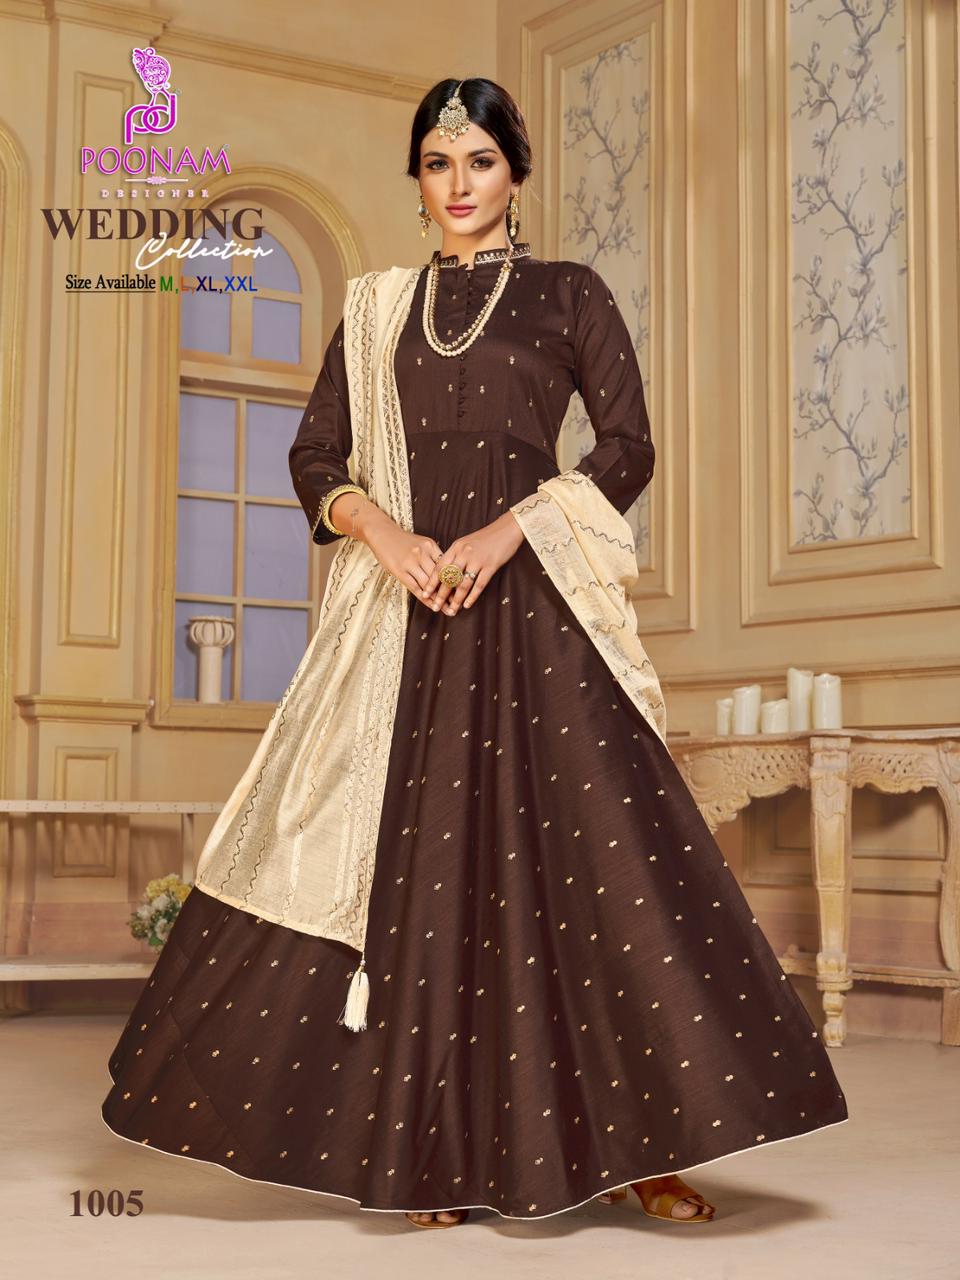 Poonam Wedding Collection collection 4